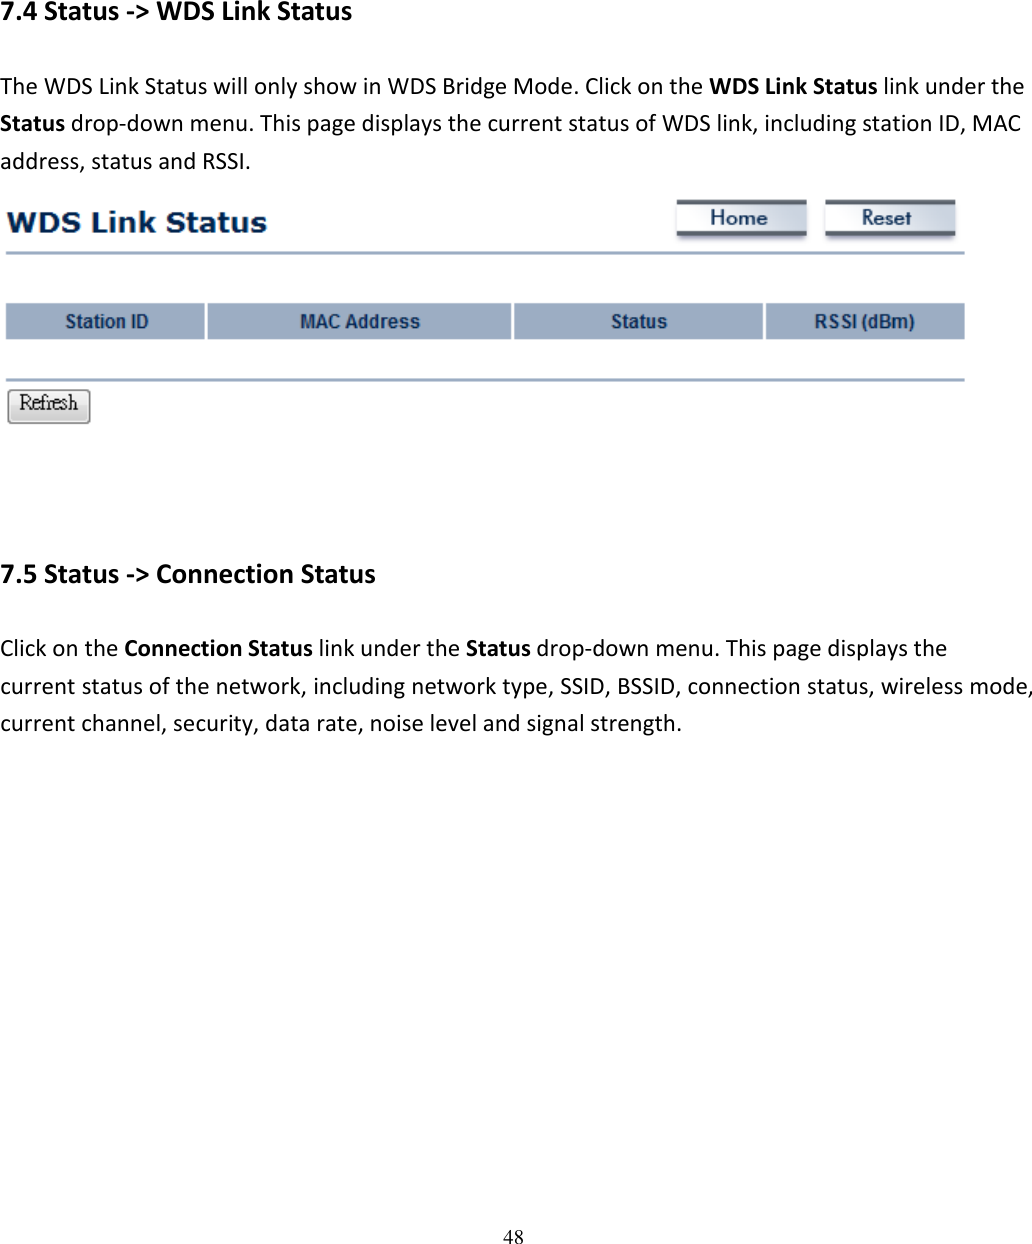 48        7.4 Status -&gt; WDS Link Status The WDS Link Status will only show in WDS Bridge Mode. Click on the WDS Link Status link under the Status drop-down menu. This page displays the current status of WDS link, including station ID, MAC address, status and RSSI.      7.5 Status -&gt; Connection Status Click on the Connection Status link under the Status drop-down menu. This page displays the current status of the network, including network type, SSID, BSSID, connection status, wireless mode, current channel, security, data rate, noise level and signal strength.   